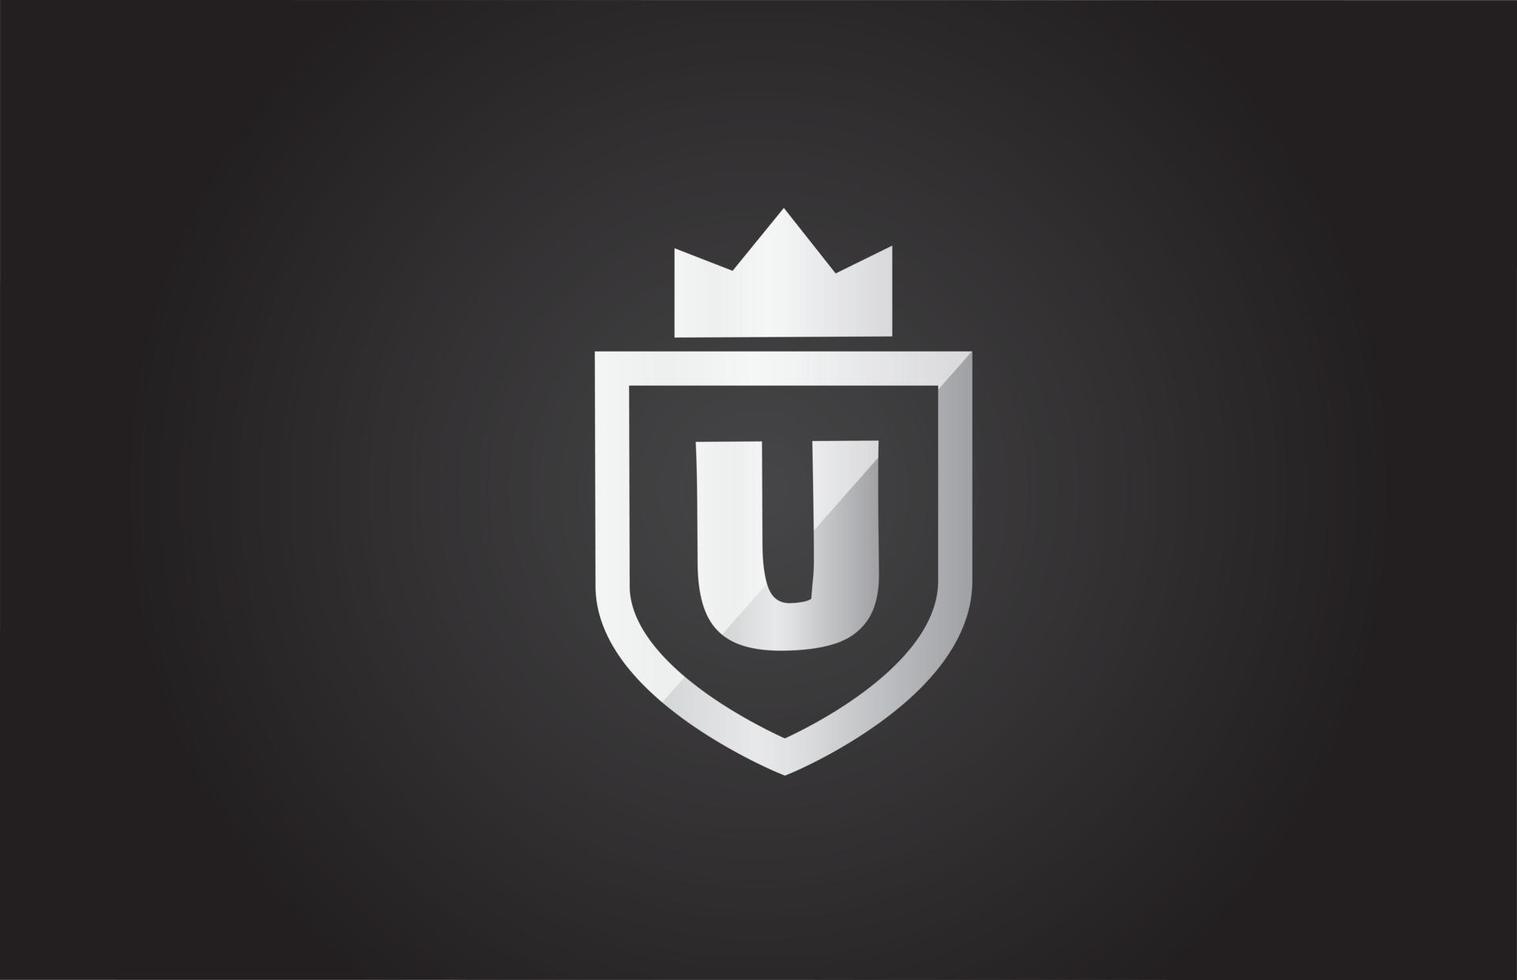 U alphabet letter logo icon in grey and black color. Shield design for company identity with king crown vector